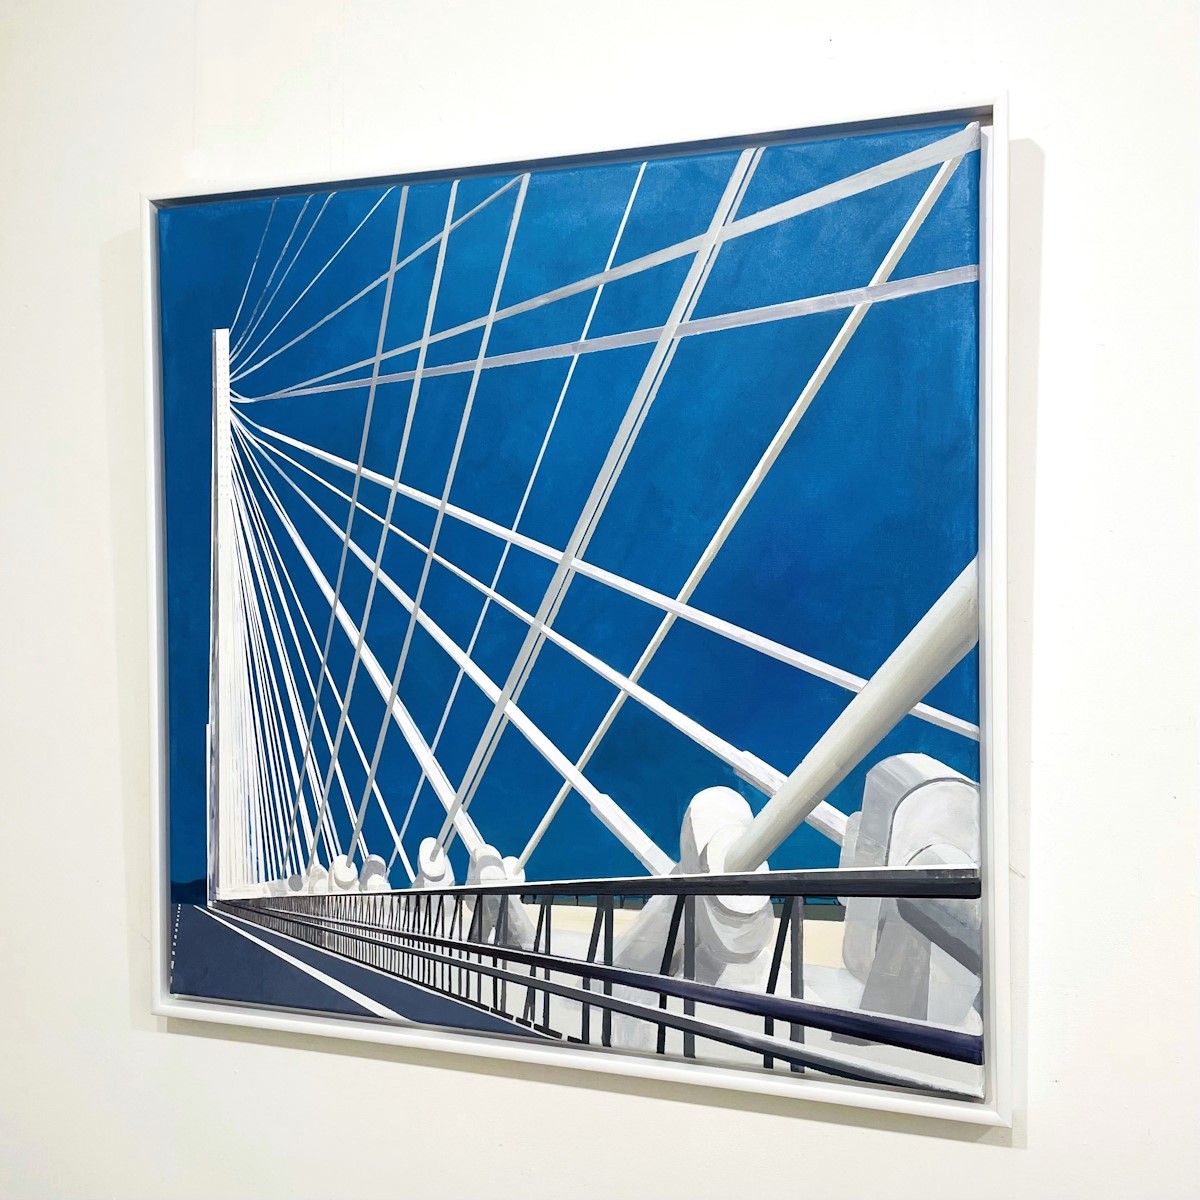 'Queensferry Crossing' by artist Judith Appleby